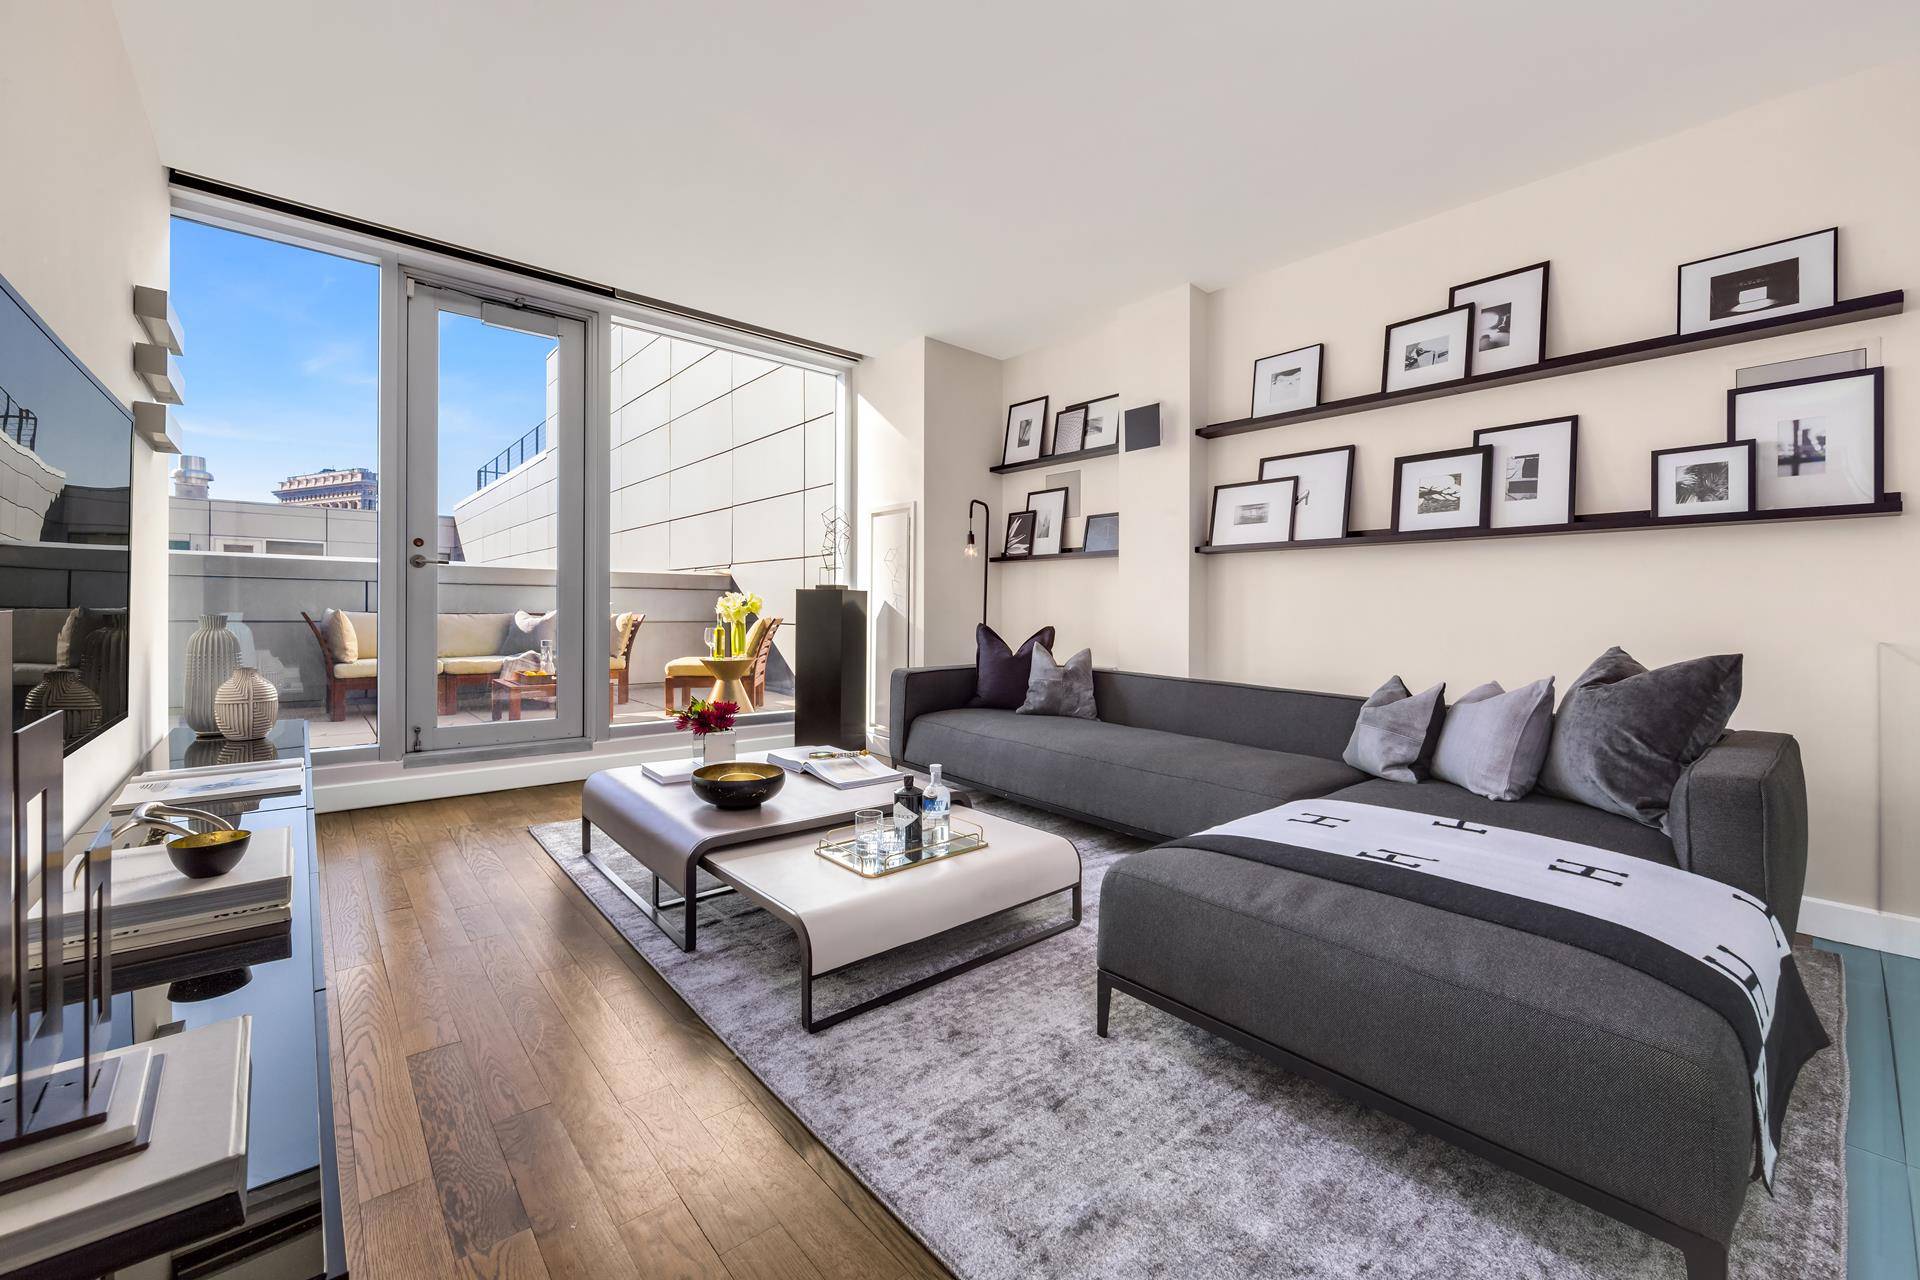 Upon entering this quintessential three bedroom, three bathroom Duplex Penthouse, you are swept away by the soaring 11ft ceilings and oversized south facing windows, inviting plenty of light throughout the ...